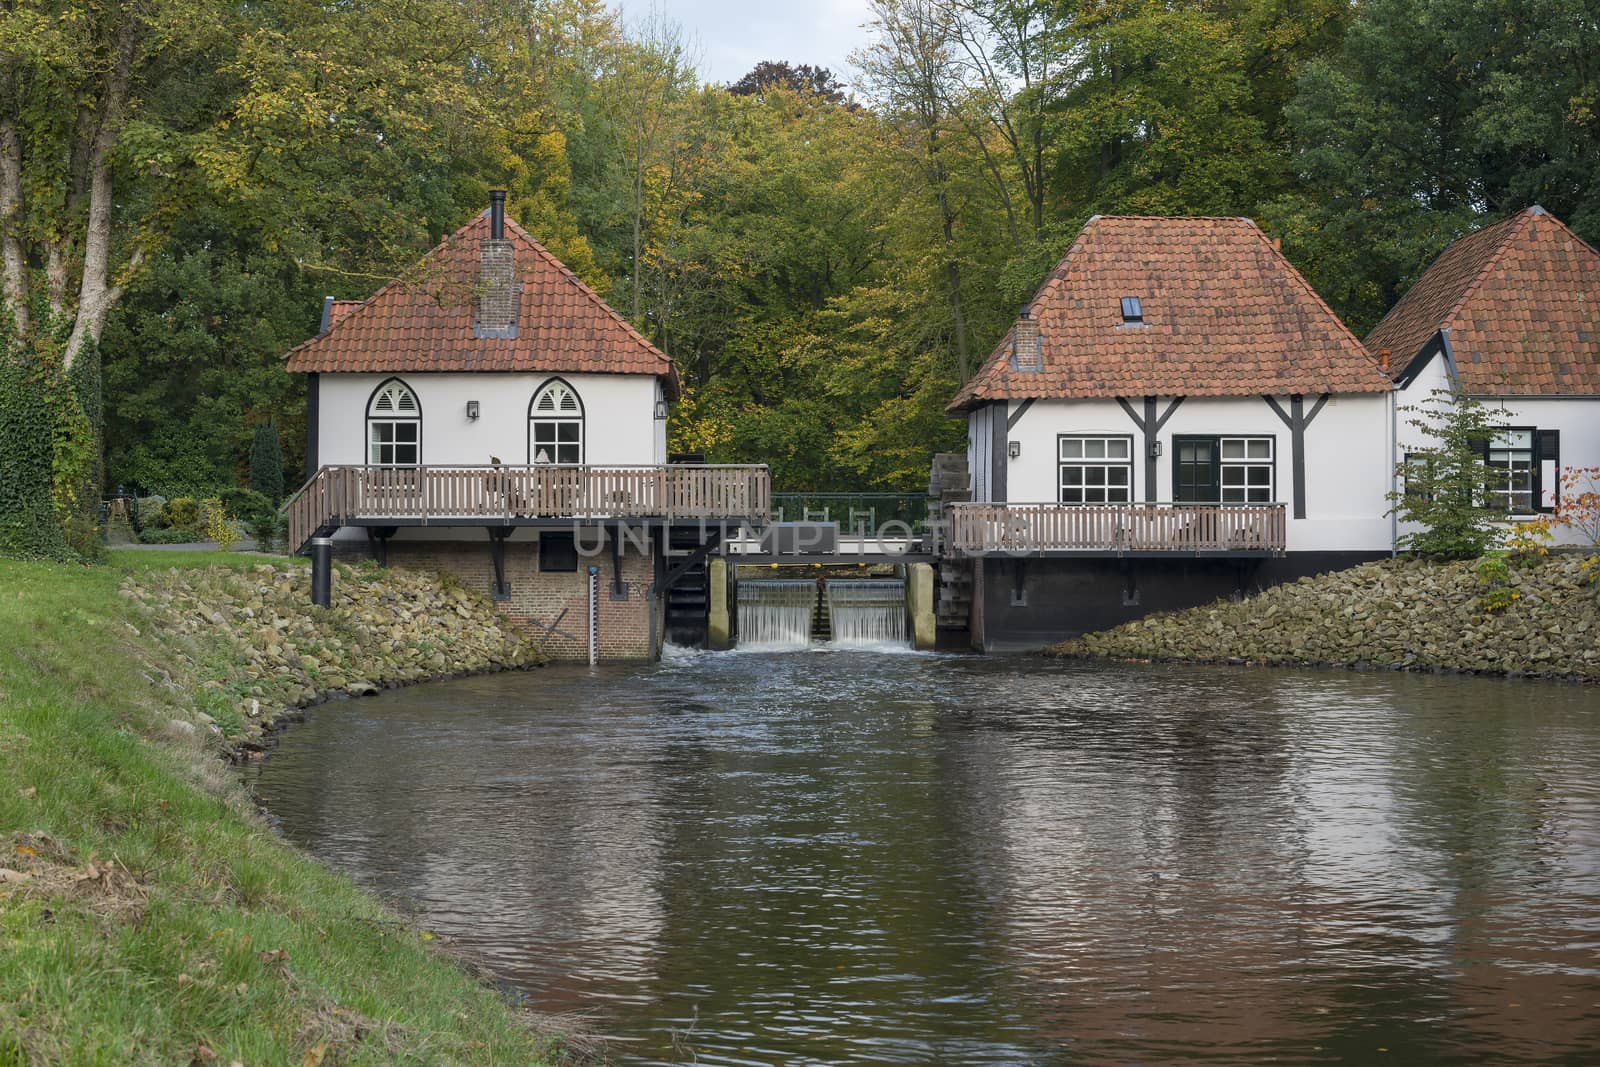 The recently restored historic water mill called The Olliemölle or Den Helder in the stream of the river the Boven-Slinge in Winterswijk in Hamlet the Achterhoek in the Netherlands. The water mill is a national monument and the restoration is completed in 2016.
